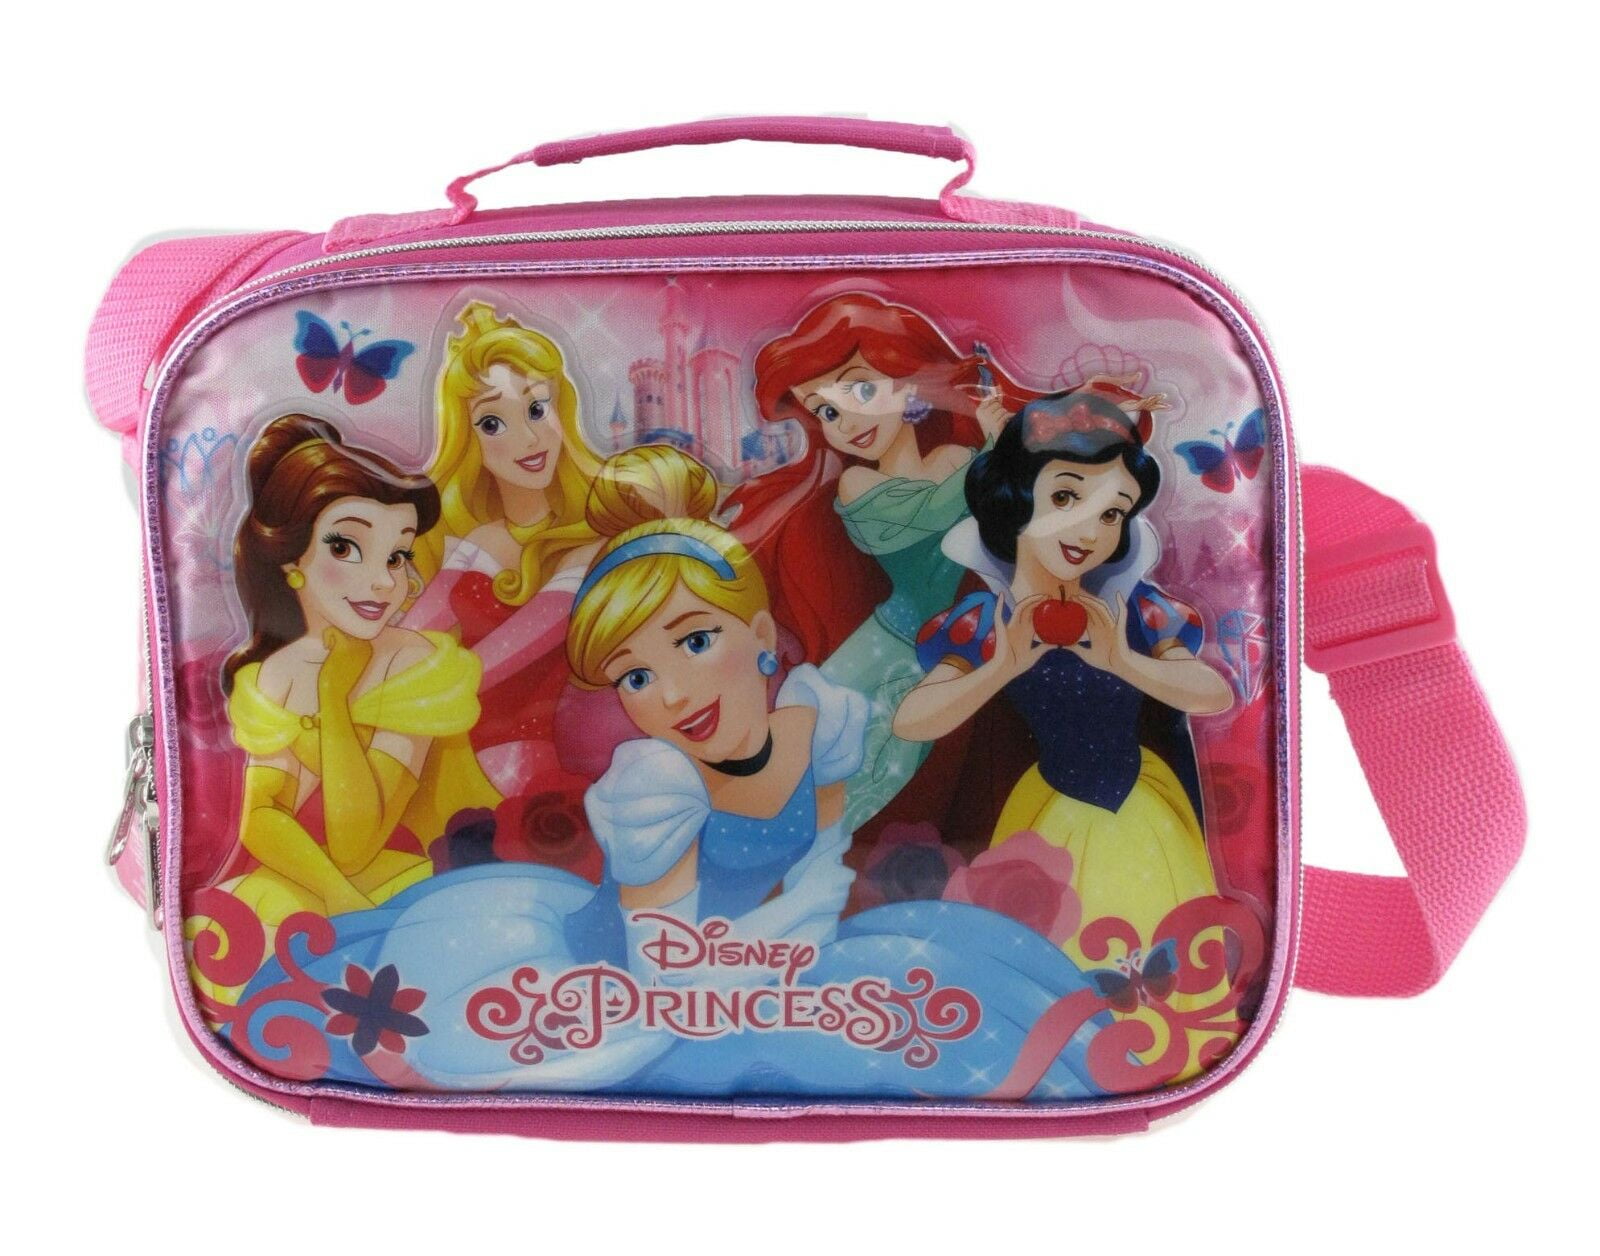 Disney Princess Insulated Lunch Bag with Shoulder Strap